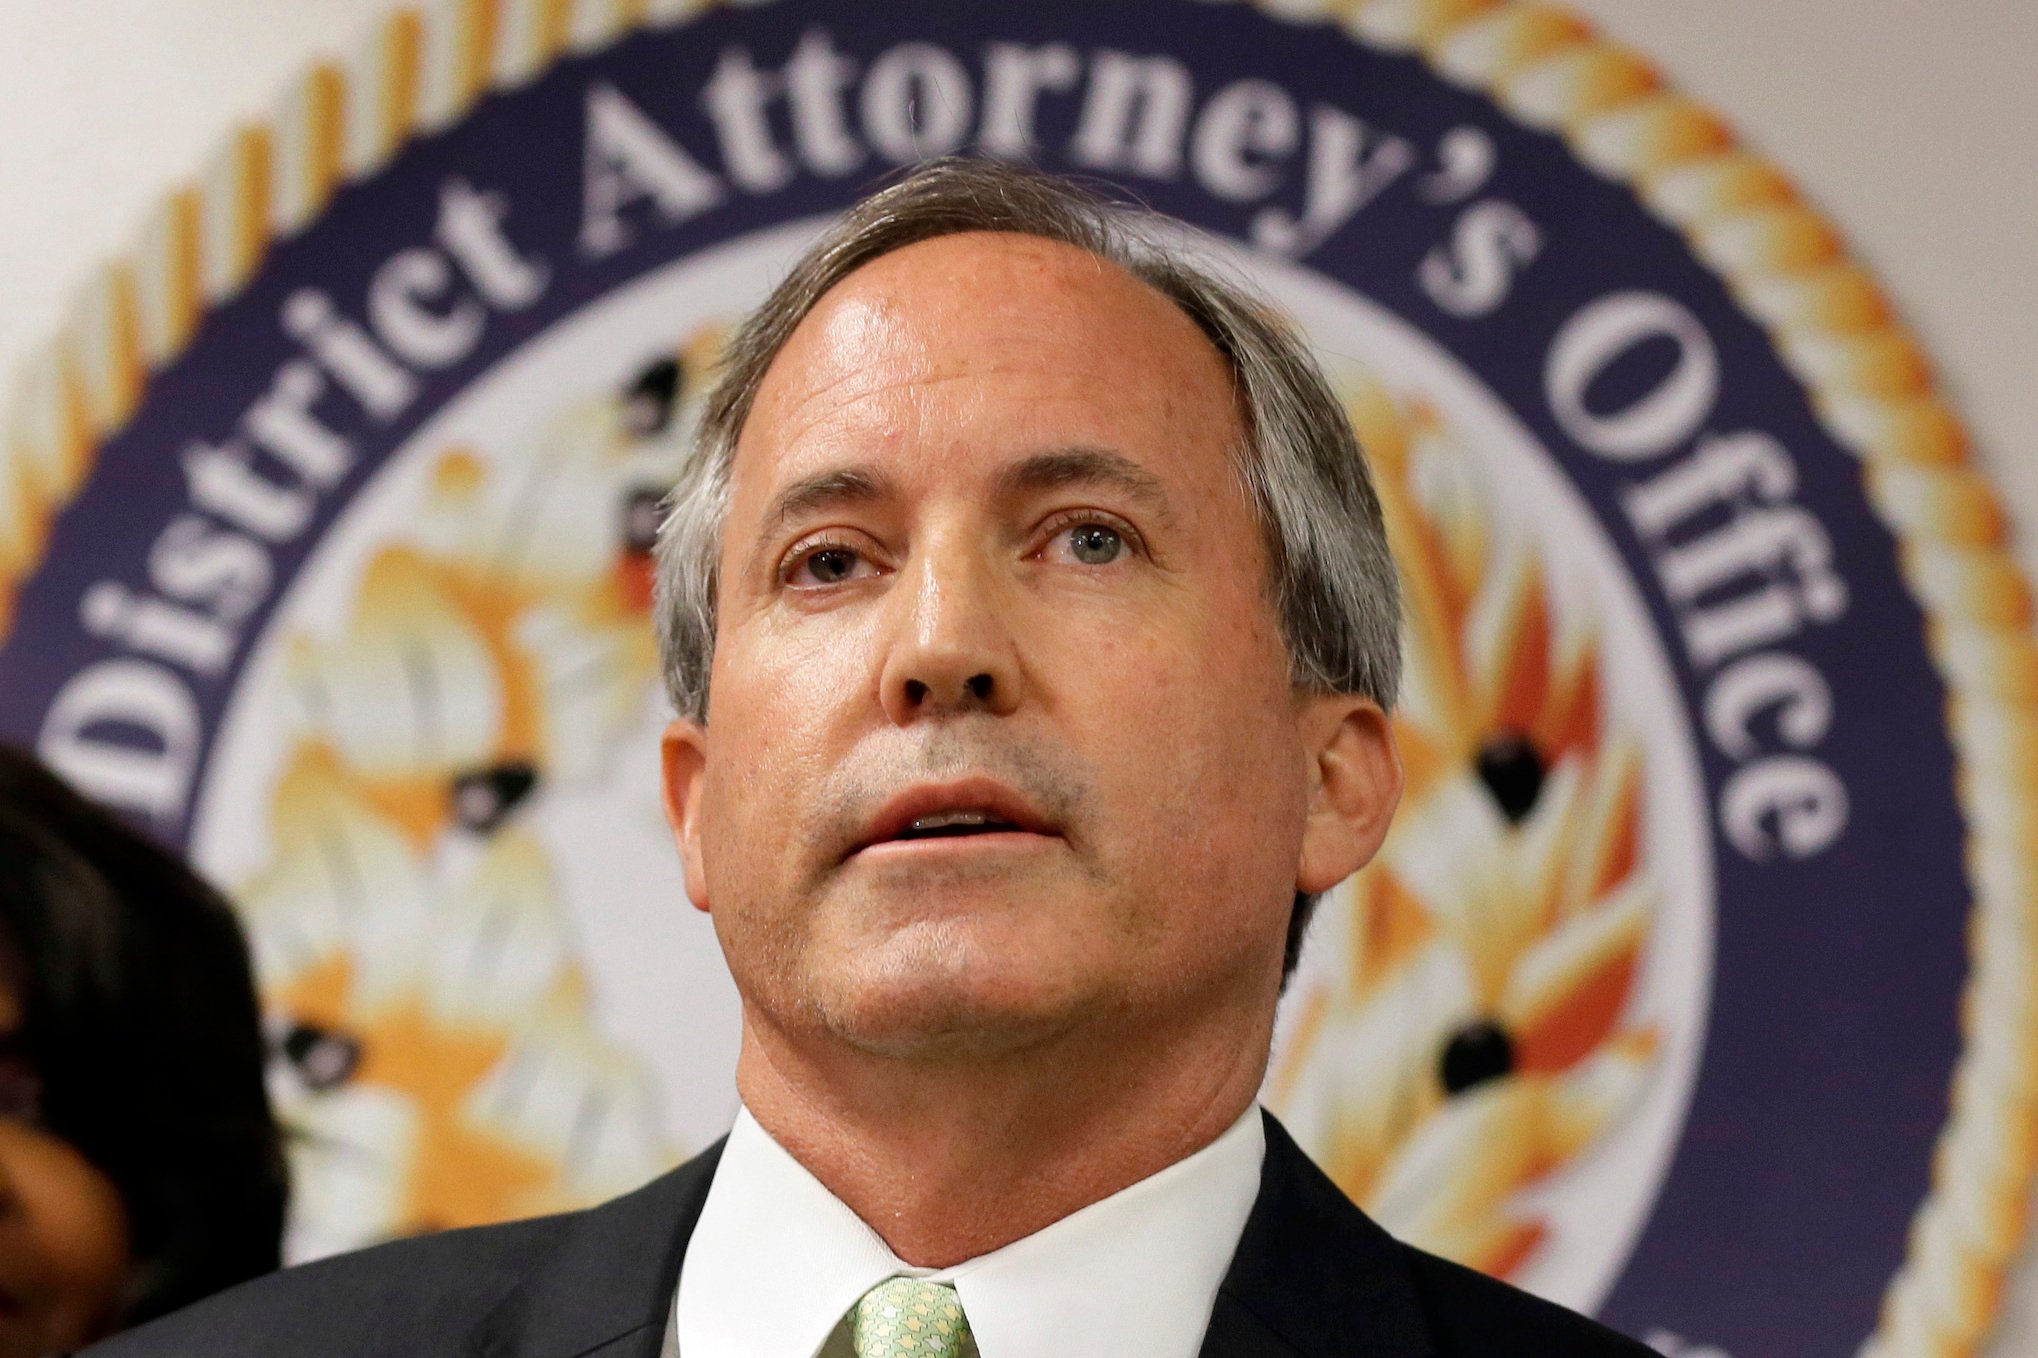 A close-up portrait of Attorney General Ken Paxton, in a suit and tie, standing in front of the seal of his office.